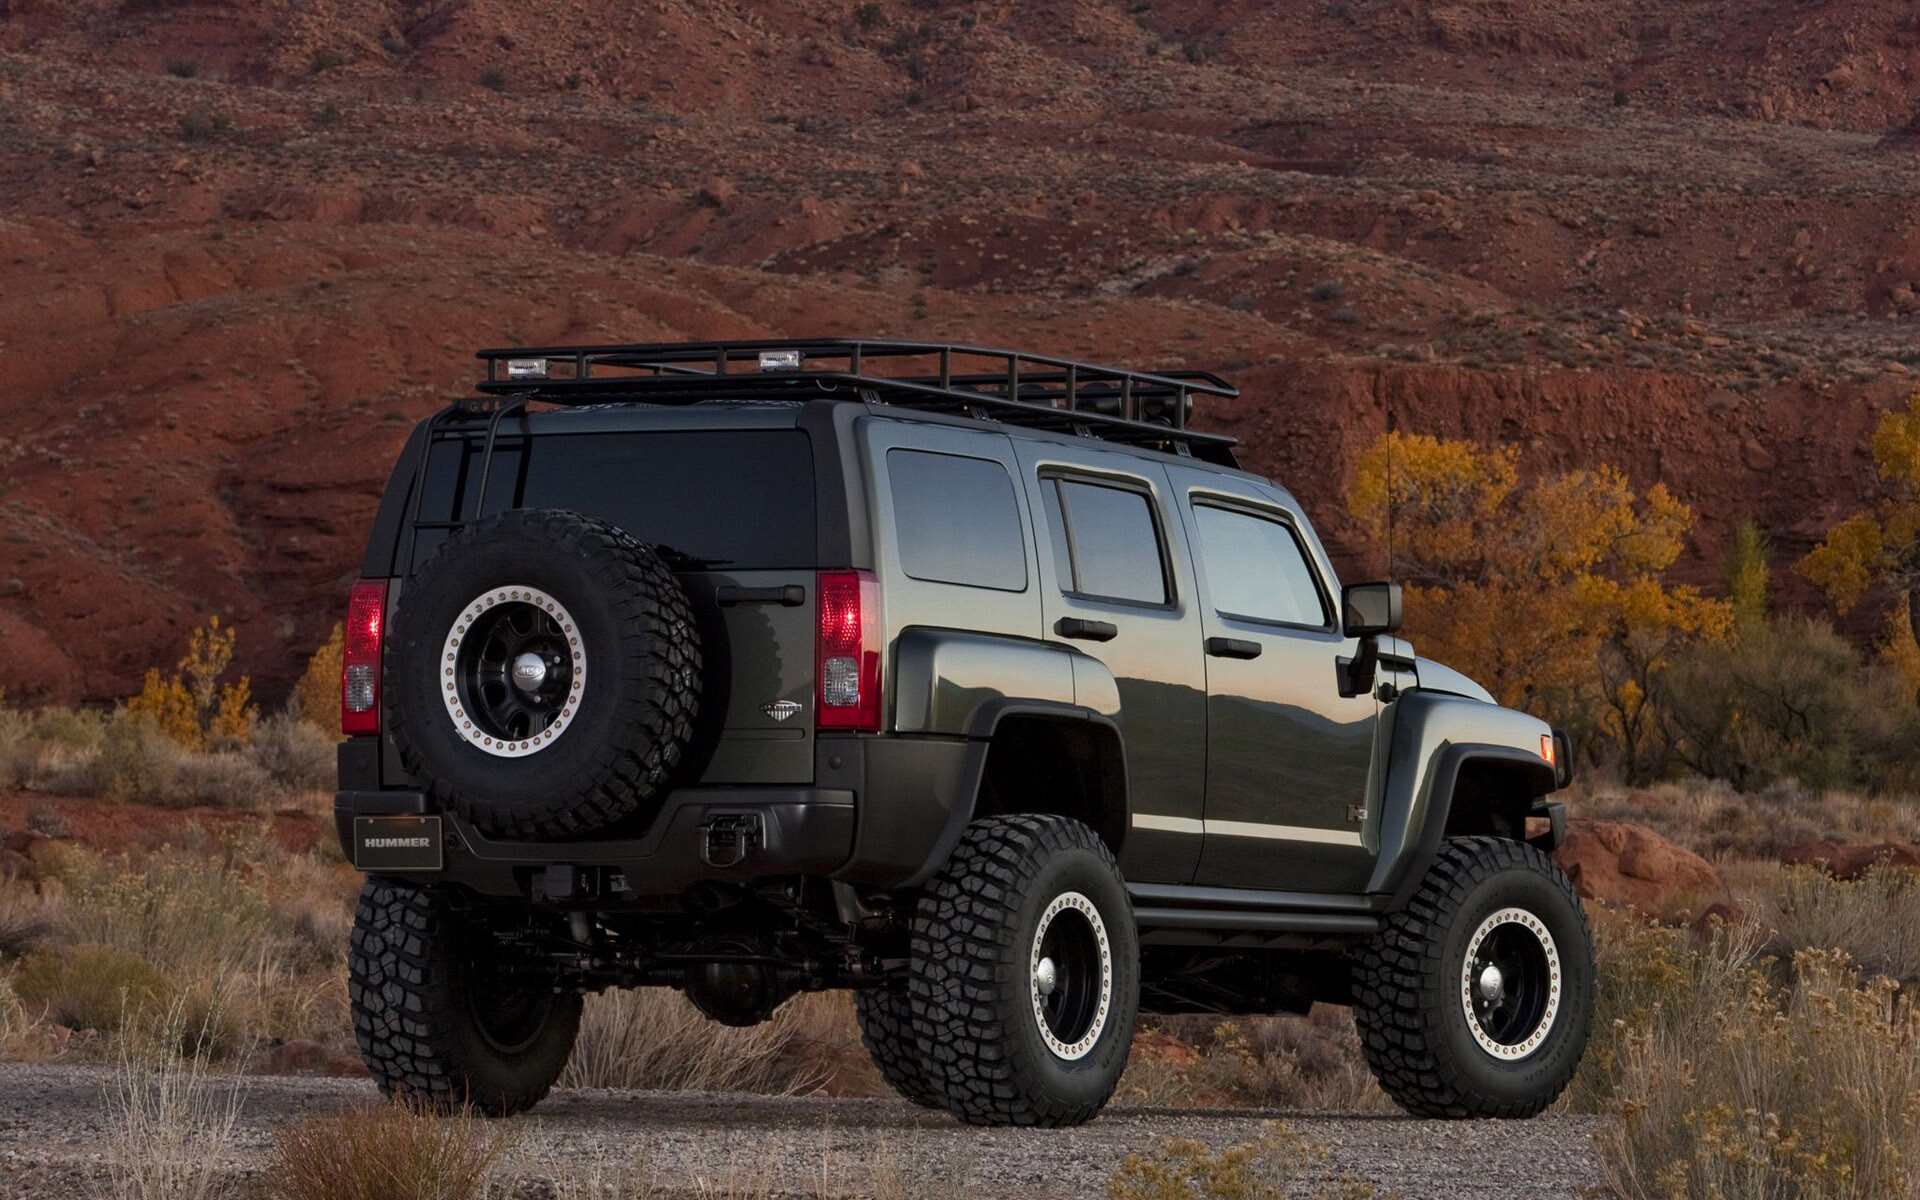 Hummer: H3 model, Was introduced for the 2006 model year, based on a modified GMT355. 1920x1200 HD Wallpaper.